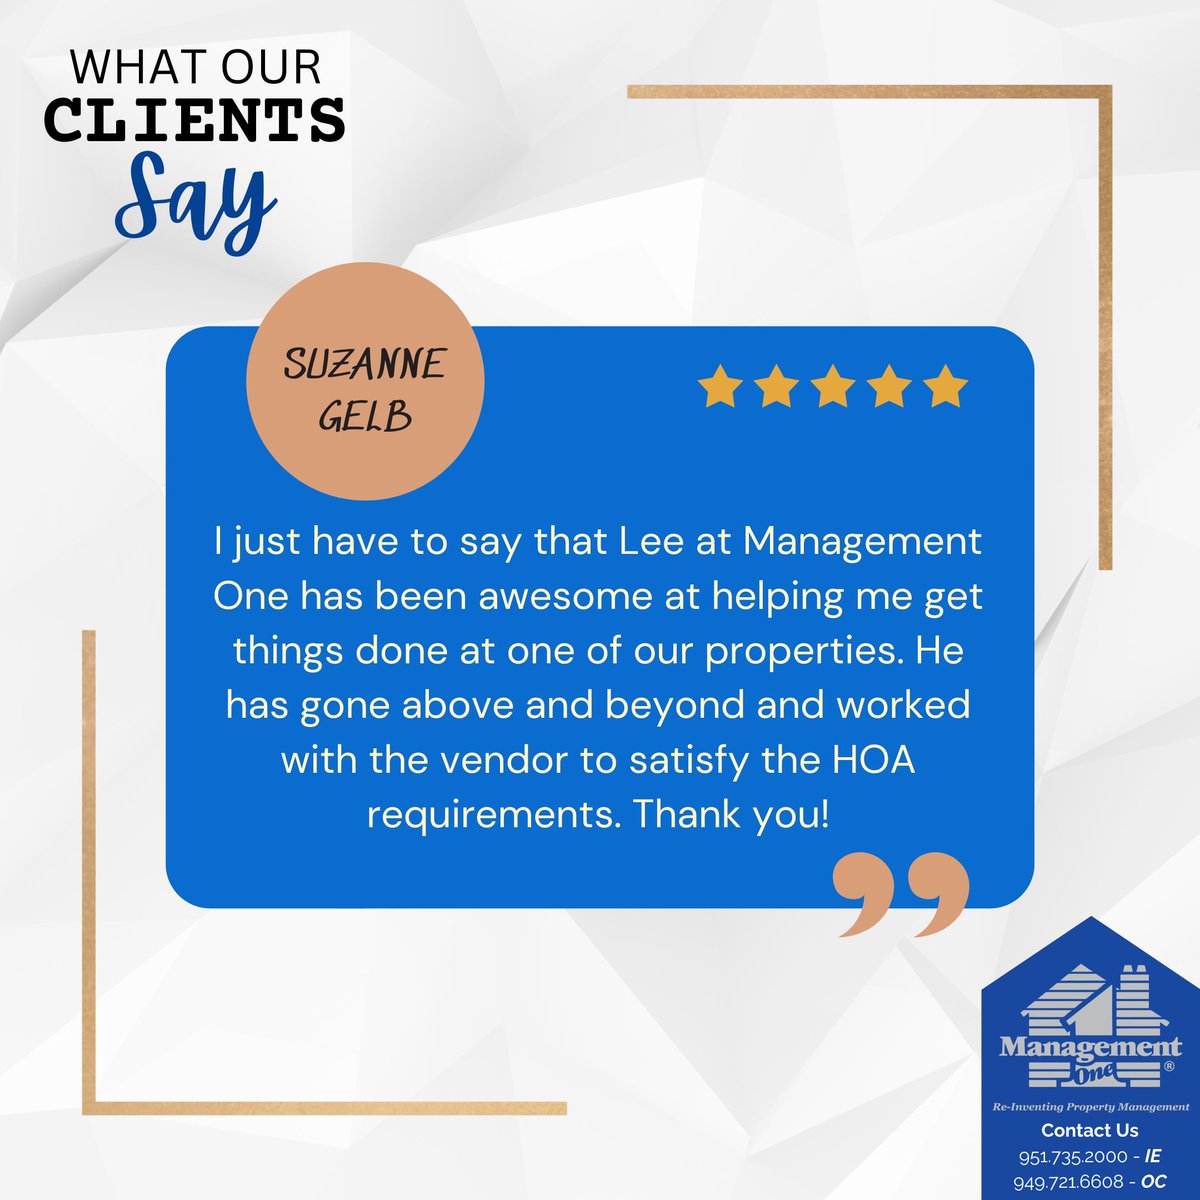 Thank you for recognizing Lee! ❤️ It’s great to know that our clients are having a great experience with our company.

Want to know more about the Management One experience? Visit us at ecs.page.link/Zj3Xz

#managementone #propertymanagement #managementoneexperience